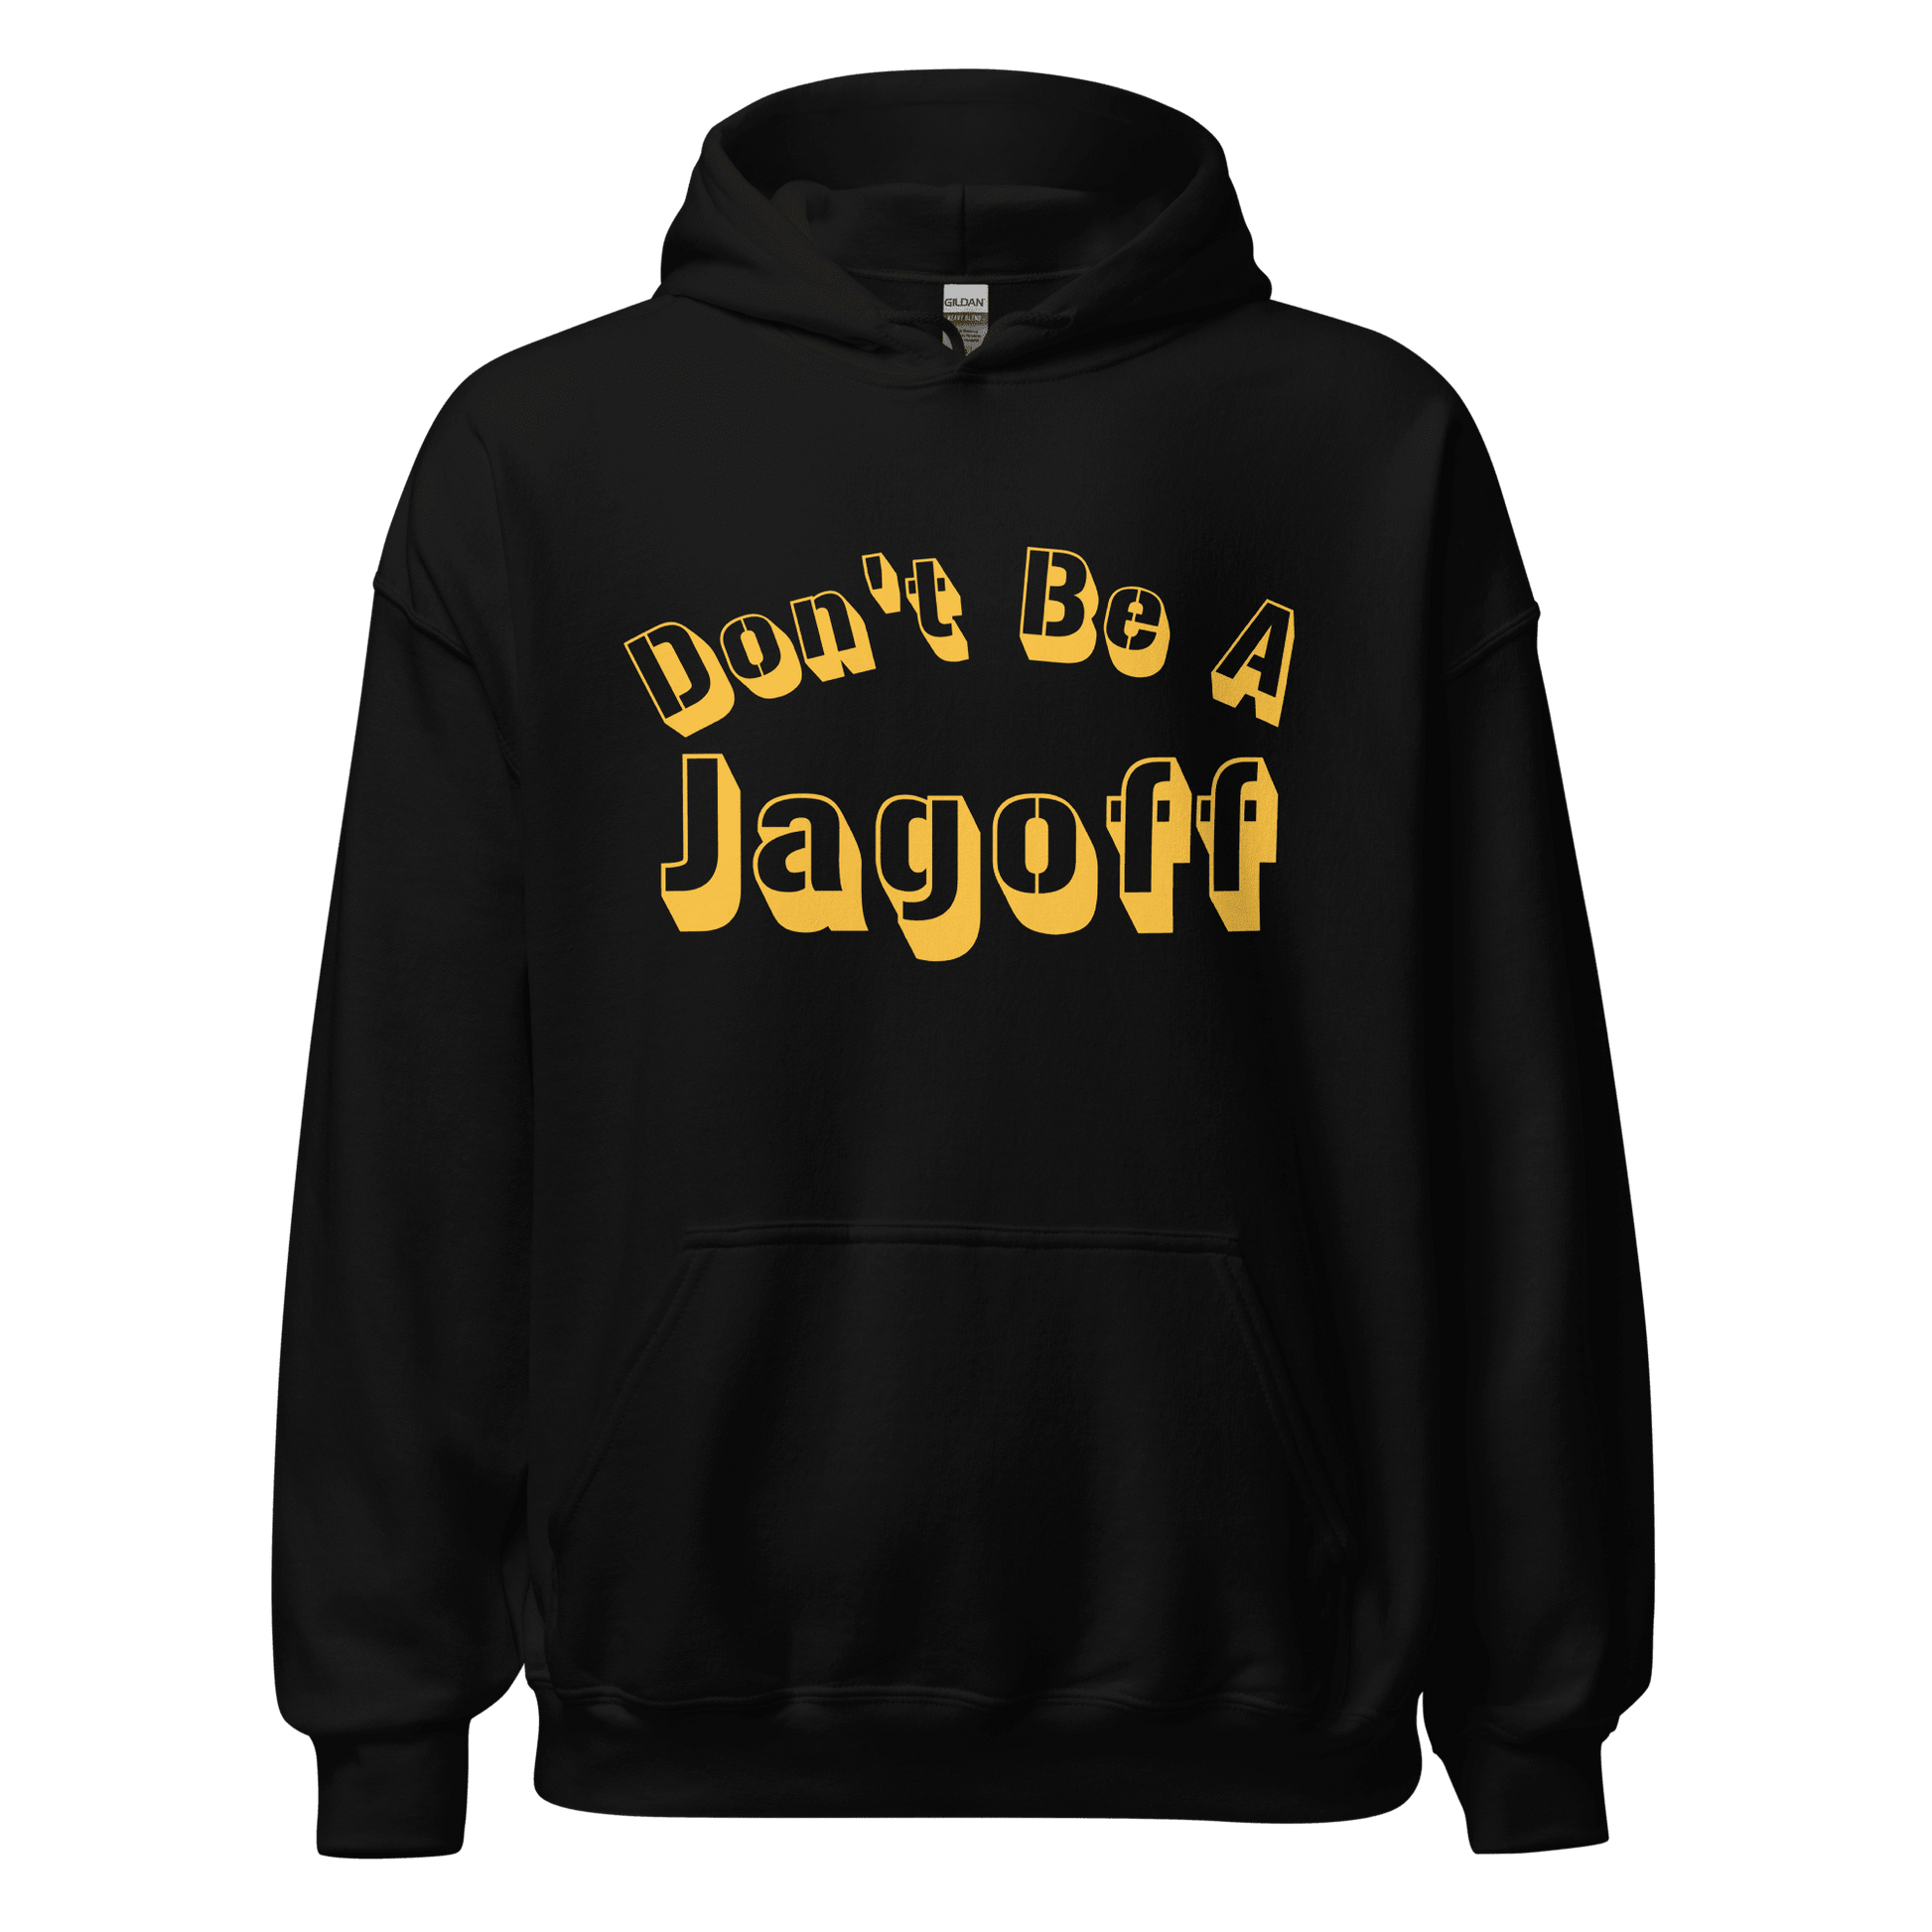 Don’t Be A Jagoff Hoodie Yinzergear Black S 